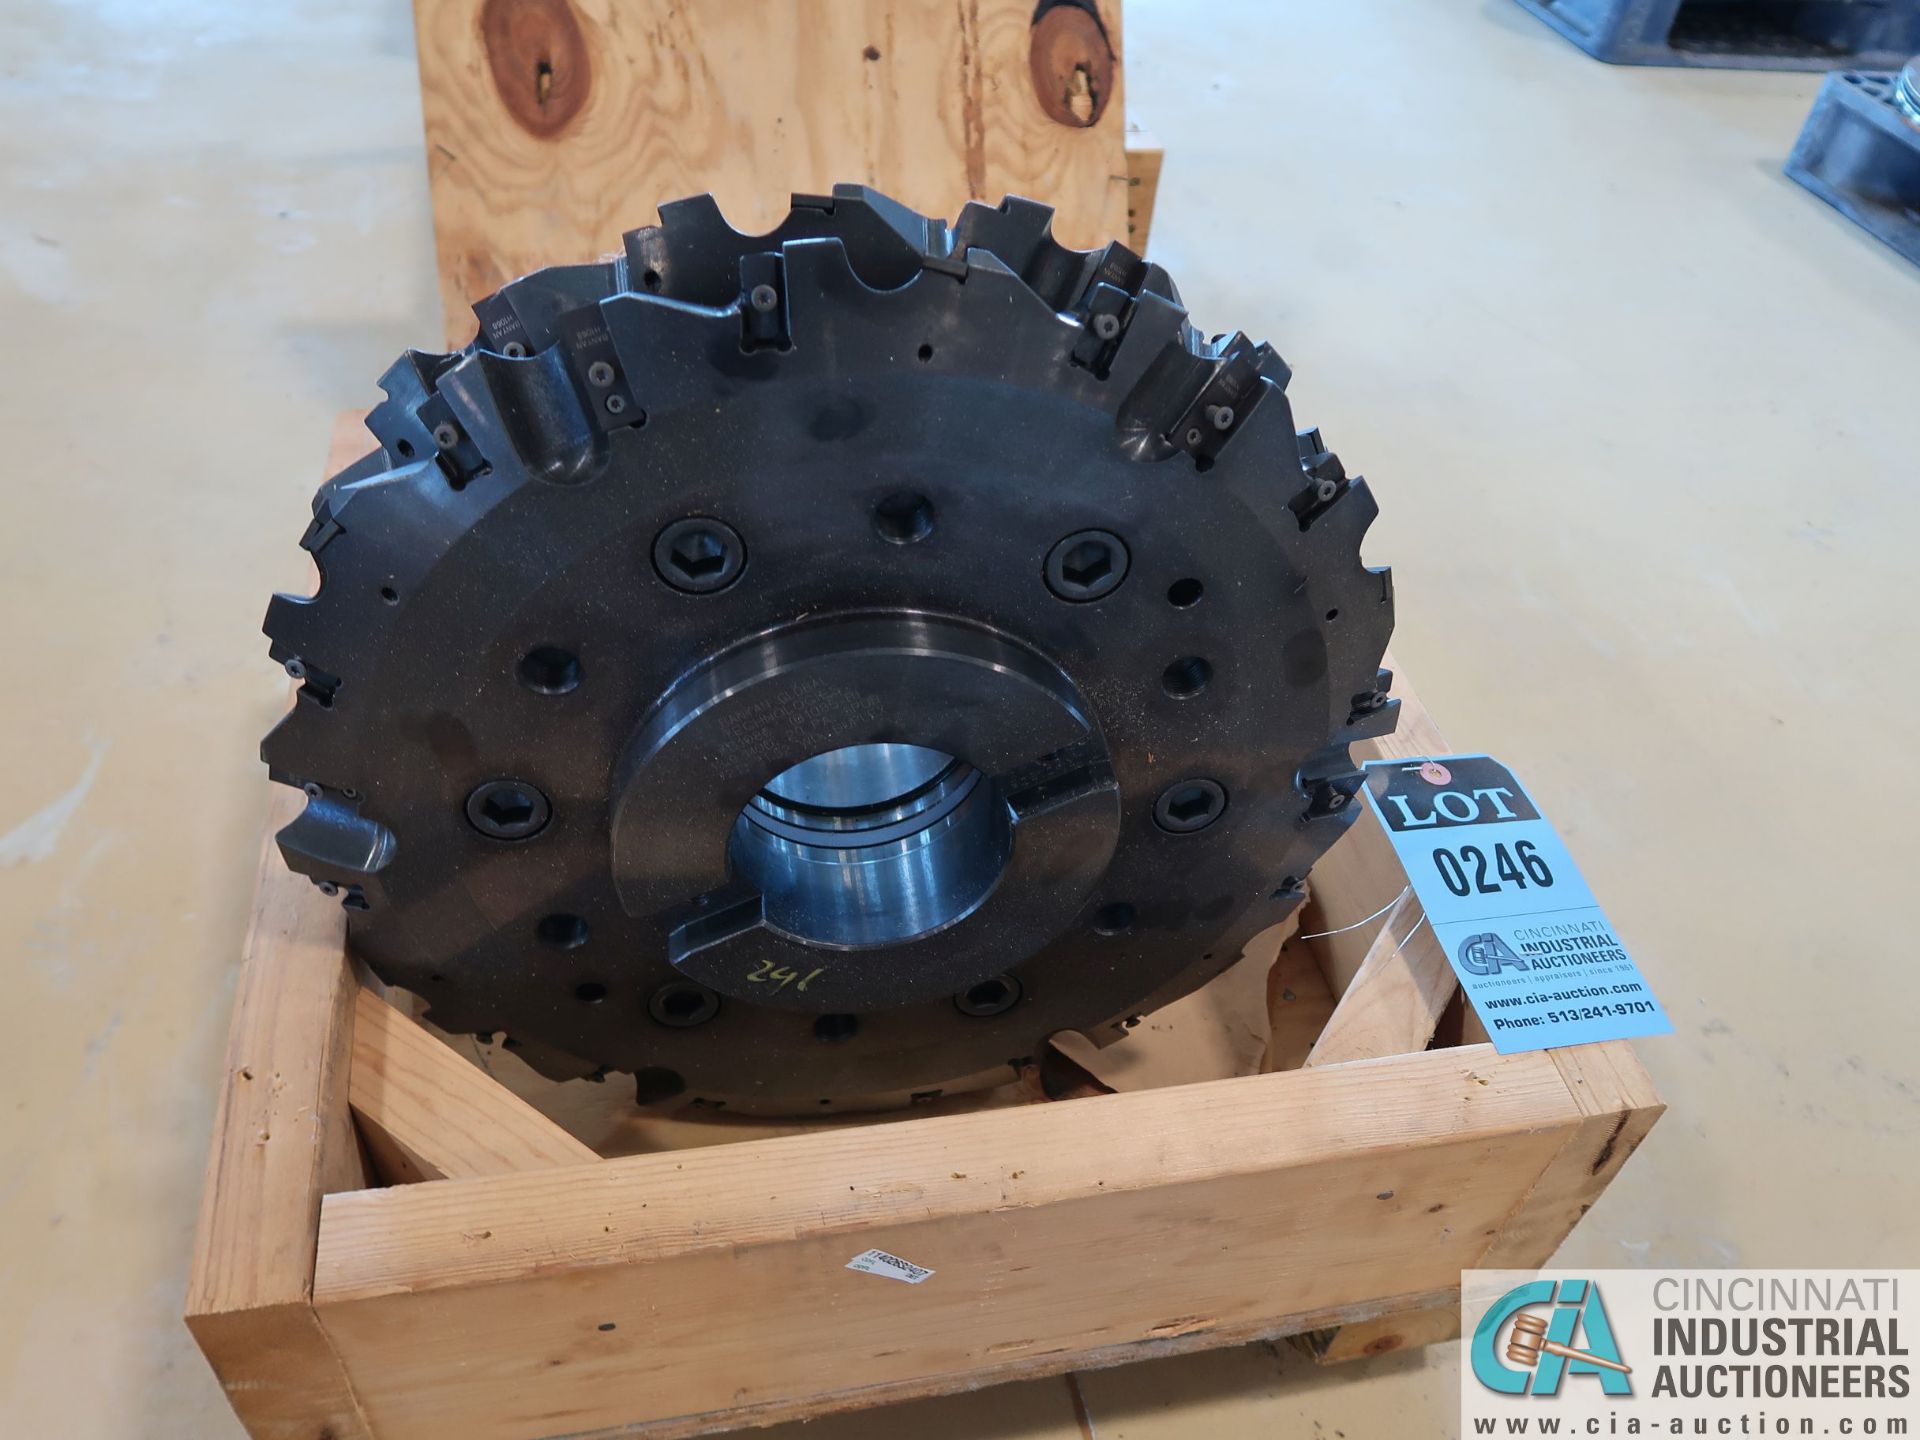 BANYAN #B1086 INDEXIBLE GEAR MILLING CUTTER - Image 5 of 6